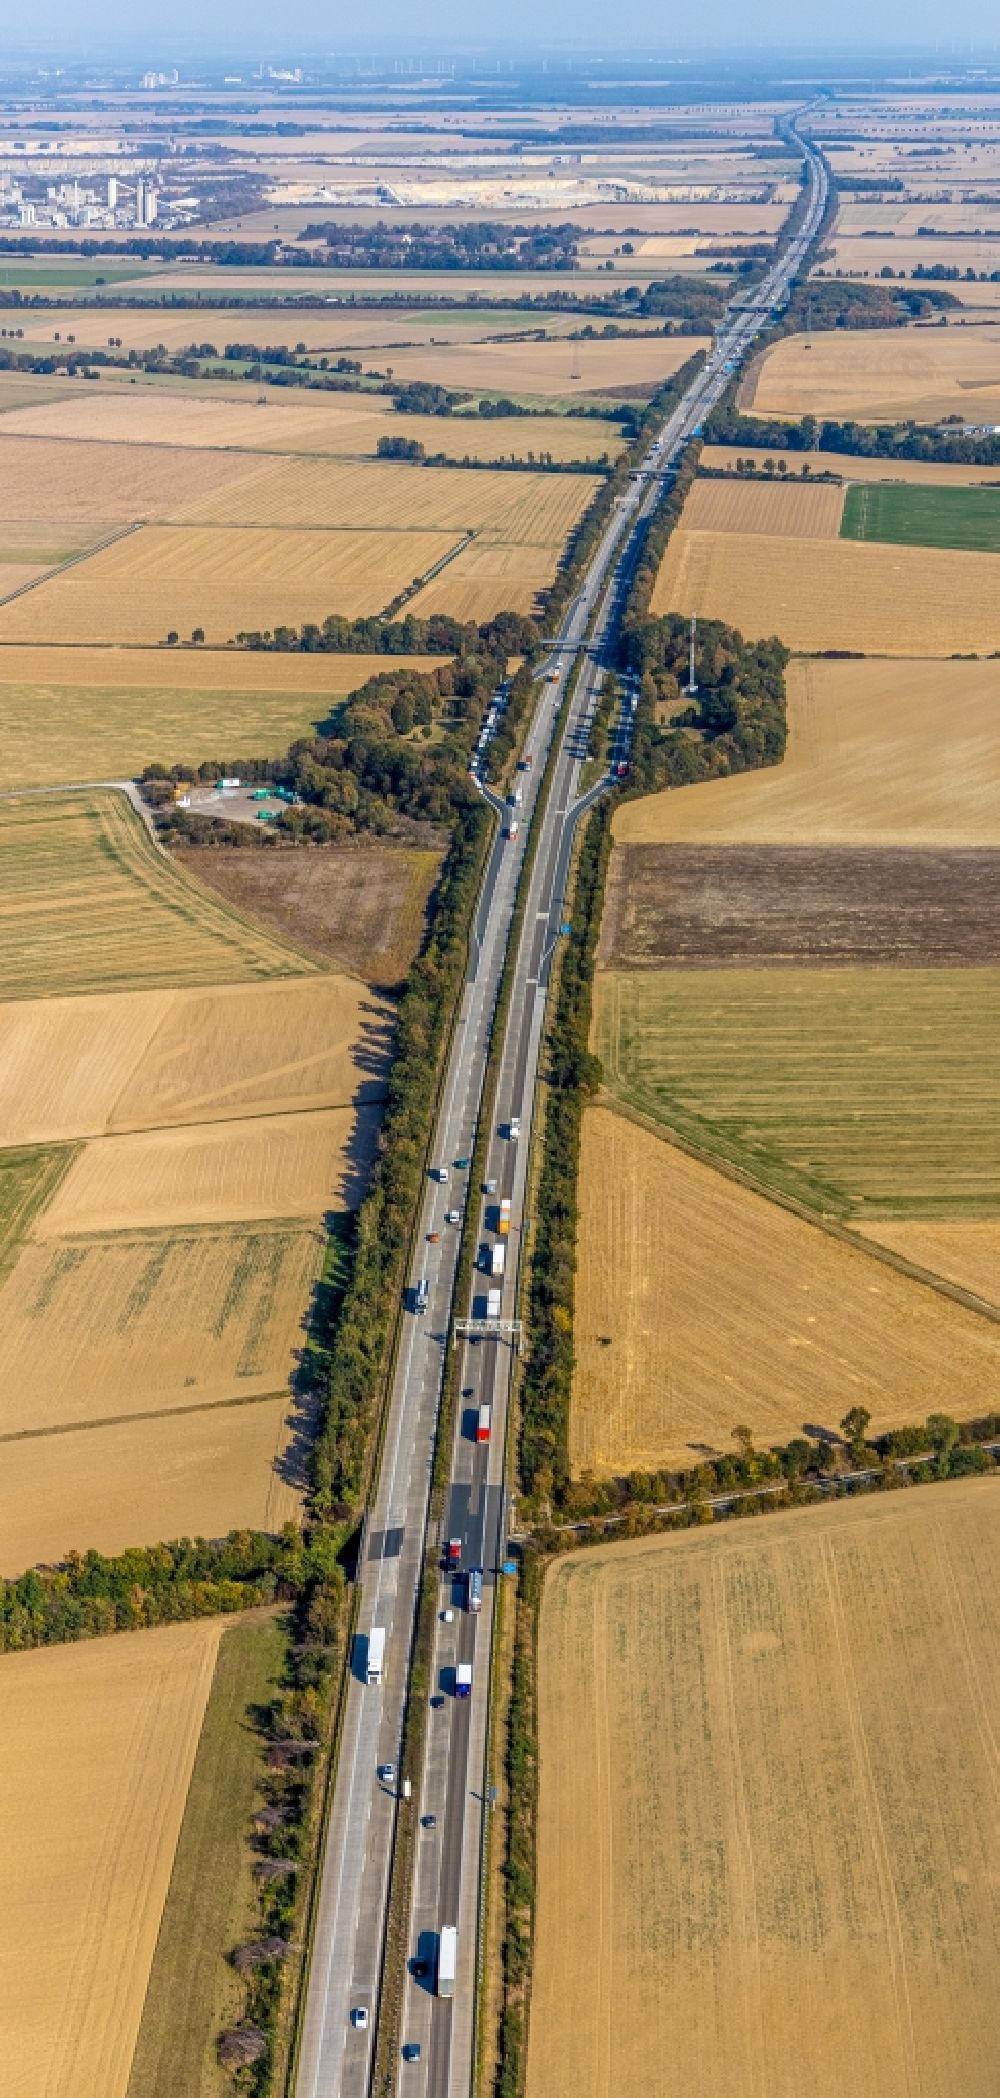 Völlinghausen from above - Motorway service area on the edge of the course of BAB highway 44 Klievermuehle in Voellinghausen in the state North Rhine-Westphalia, Germany